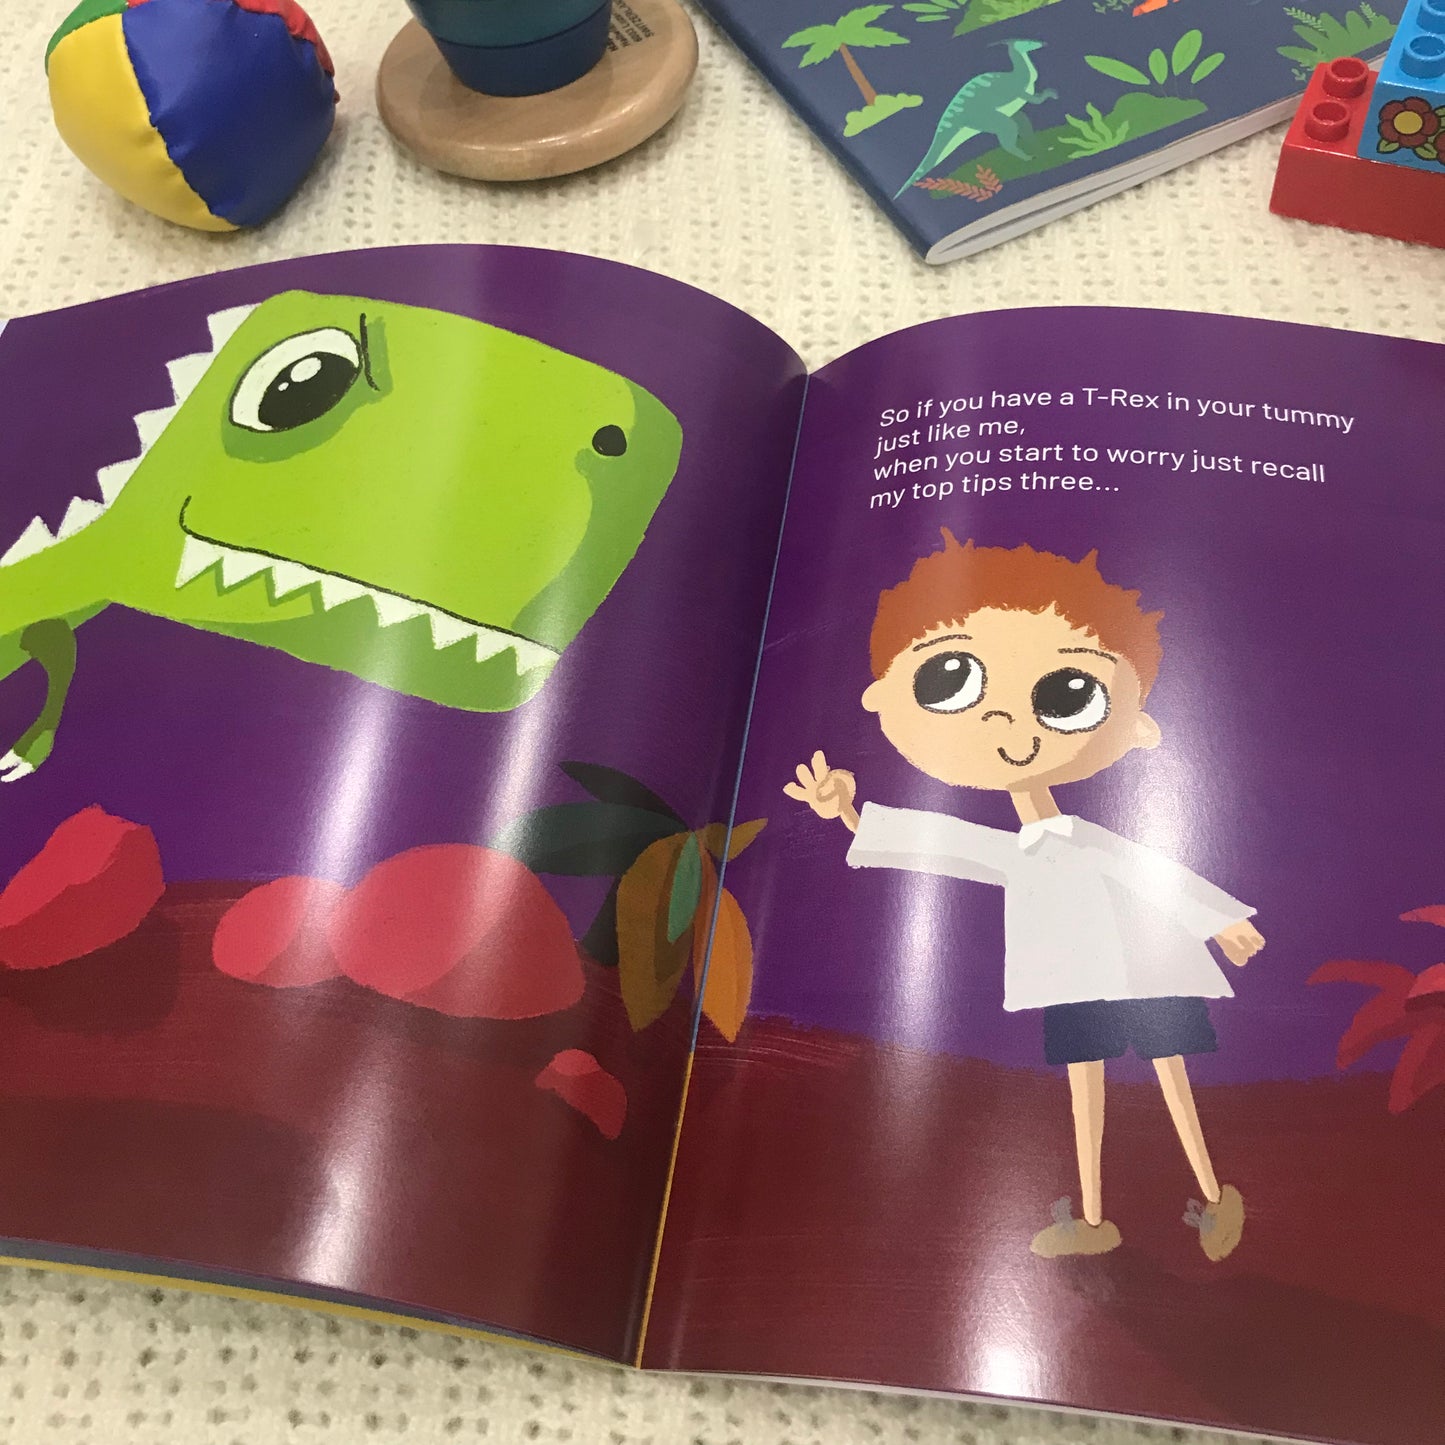 Pages from There's a T-Rex in my Tummy childrens book.